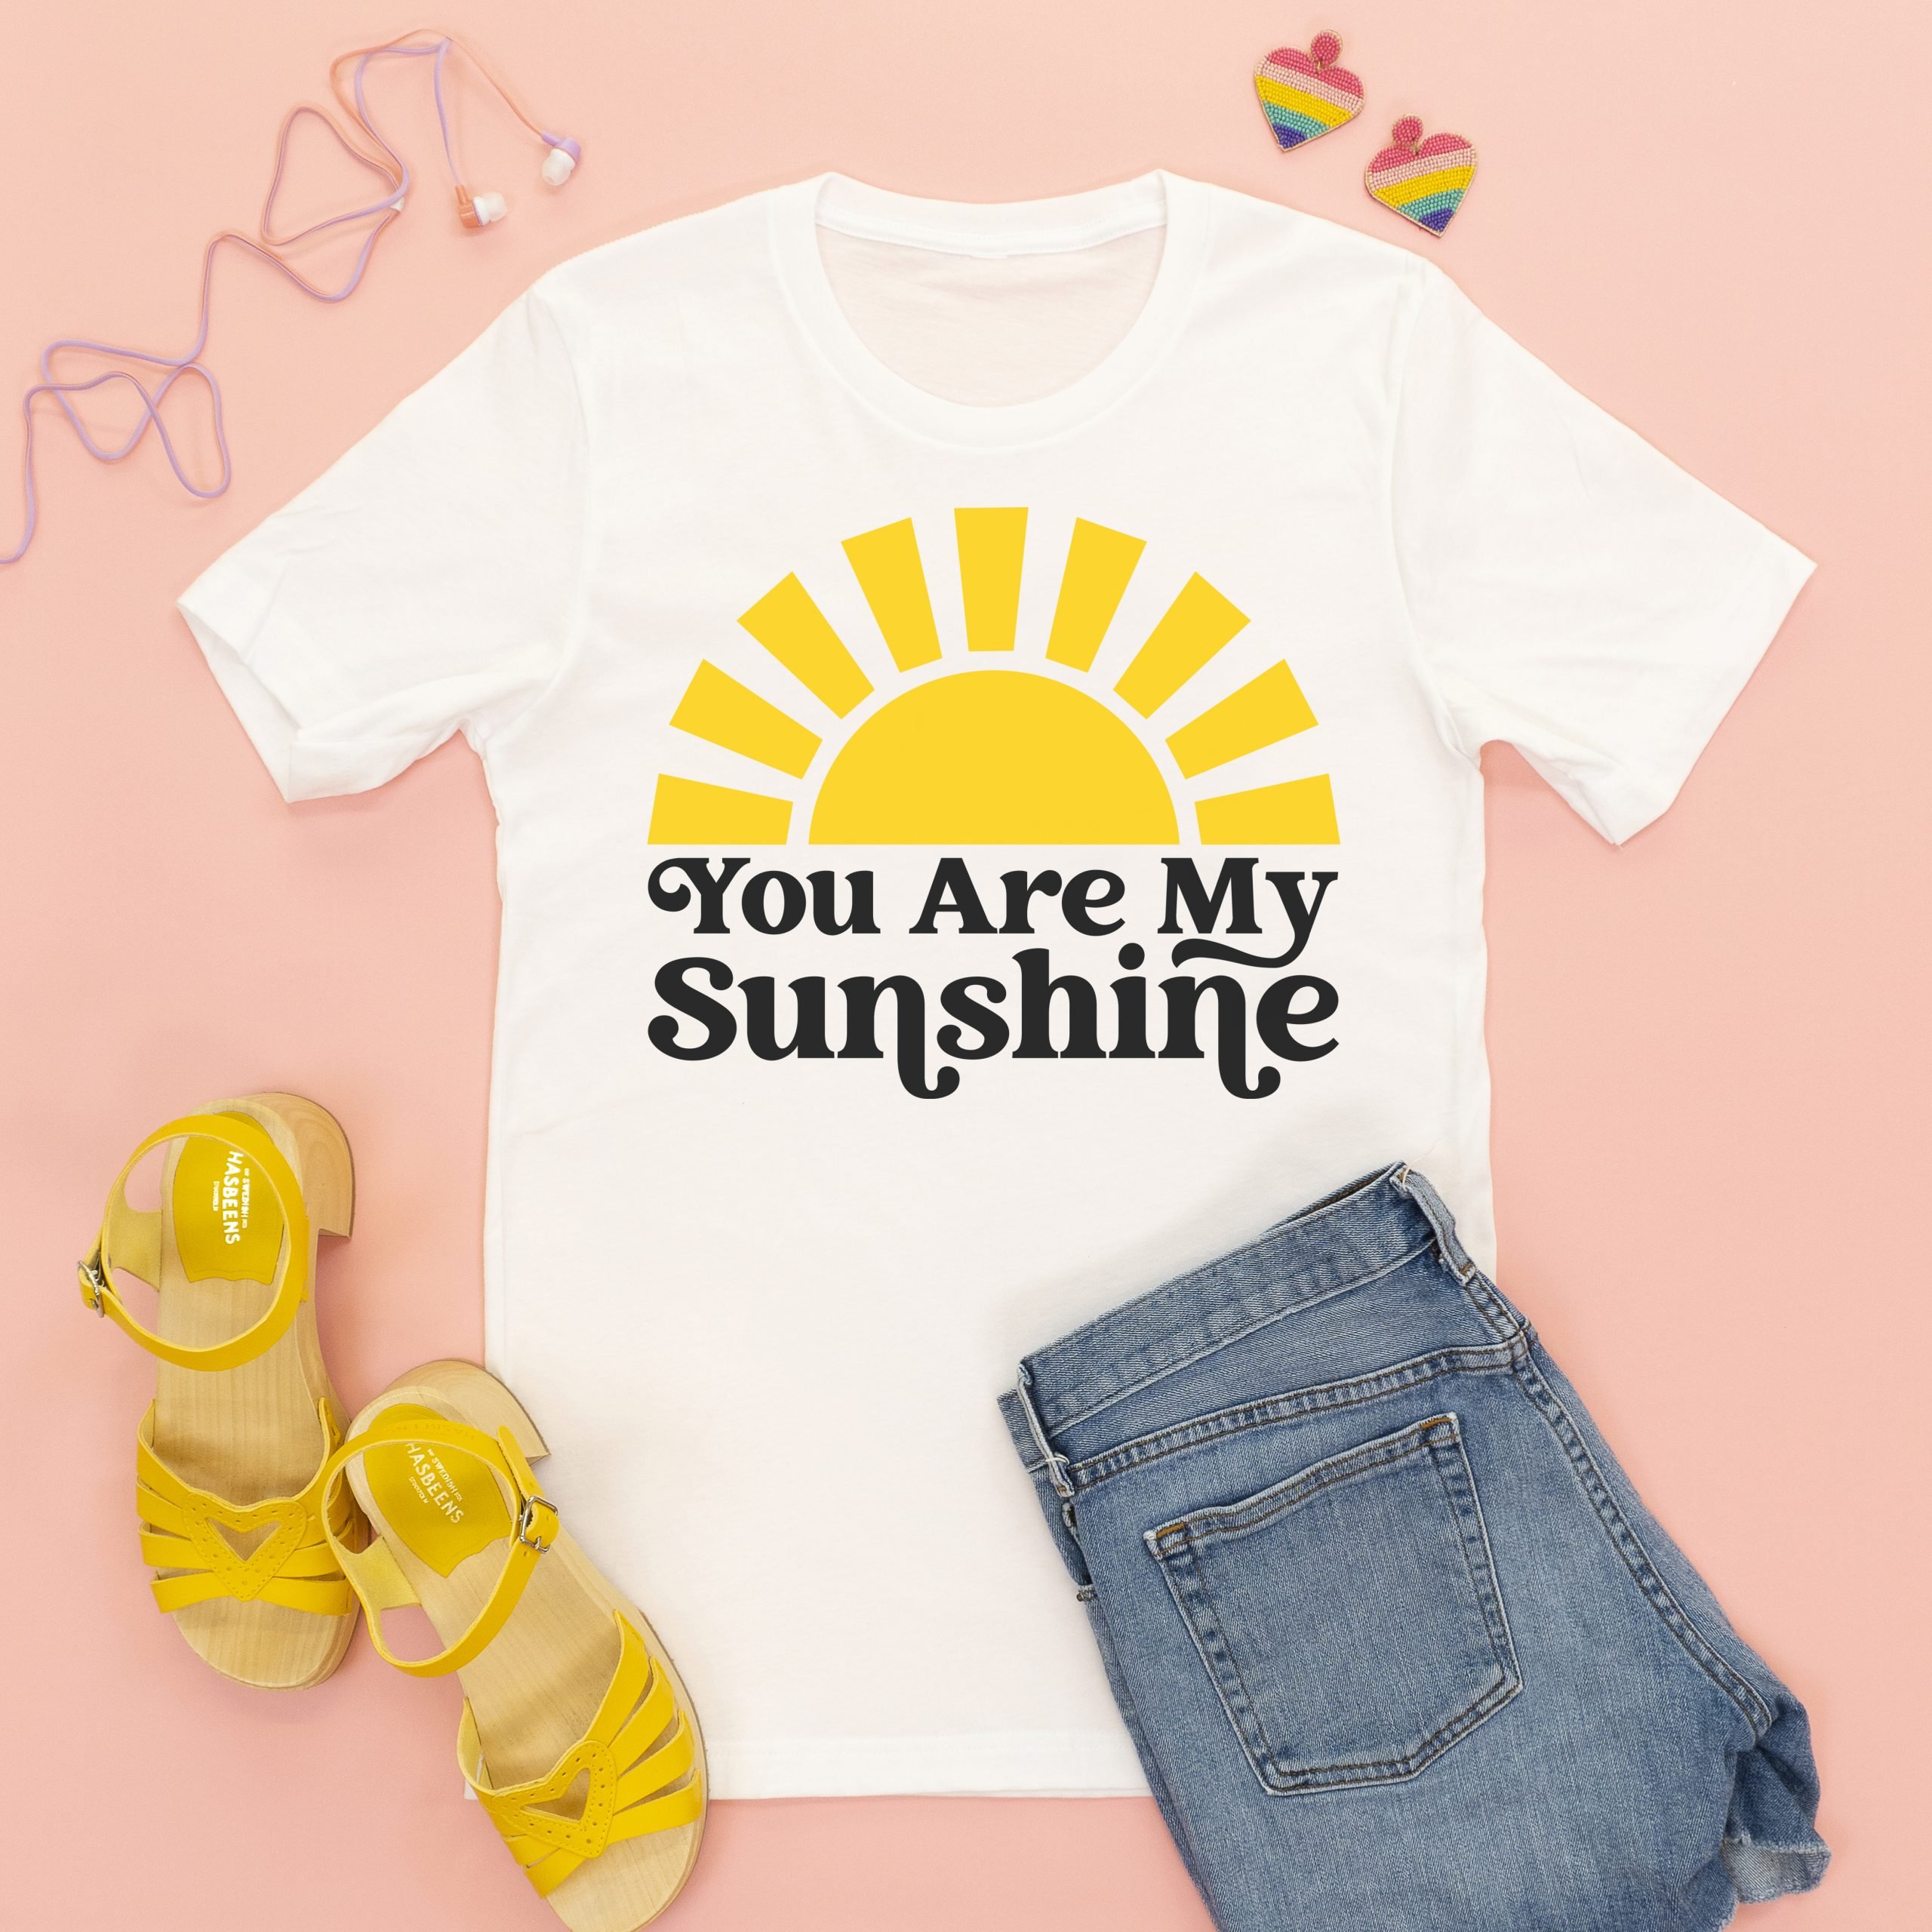 Free “You Are My Sunshine” SVG File + More Sun SVGs